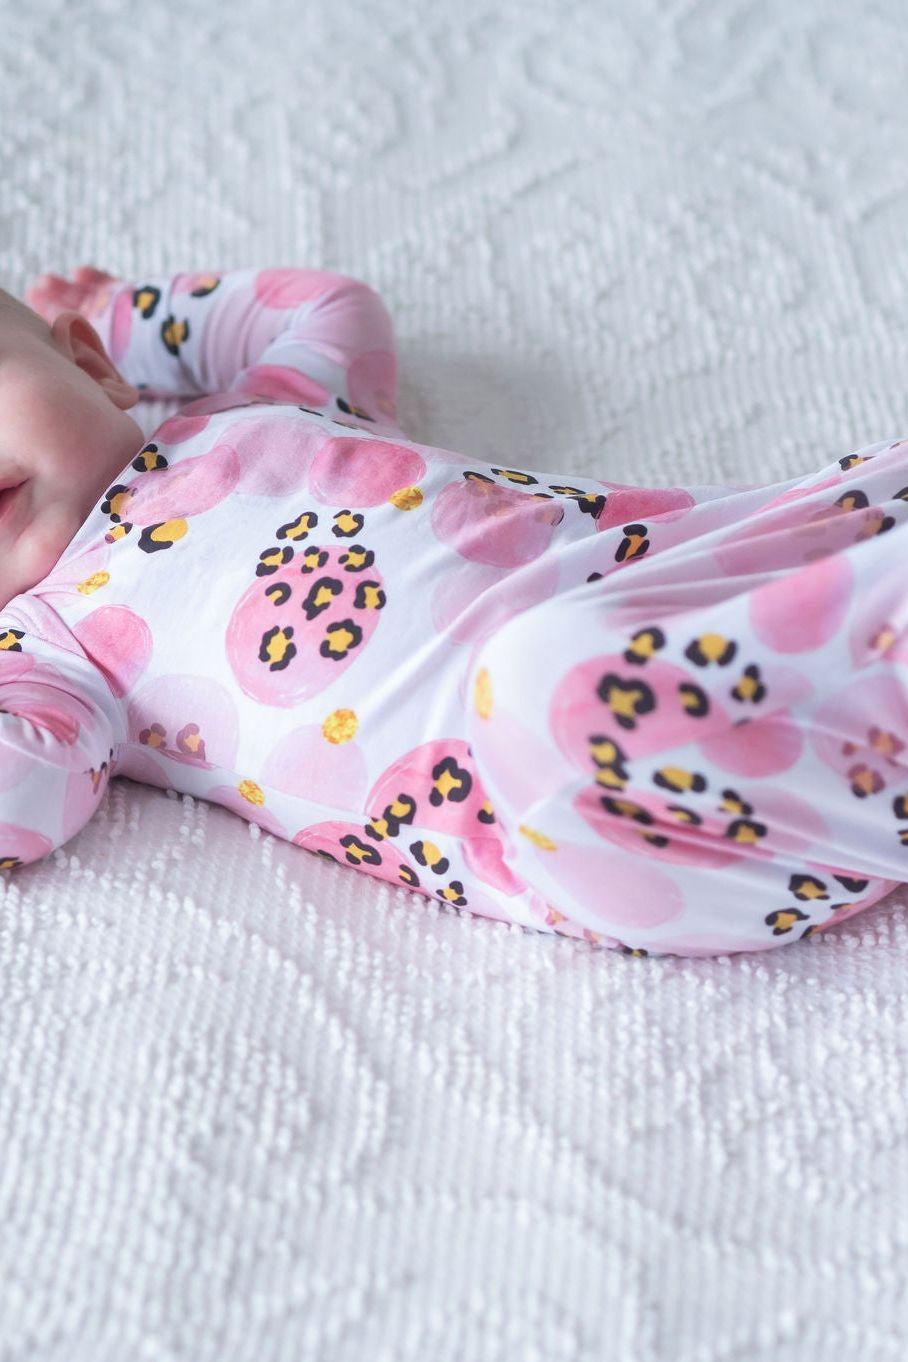 Stylish Leopard Print Newborn Knotted Gown - Perfect for Photo Shoots! - Sophia Rose Children's Boutique